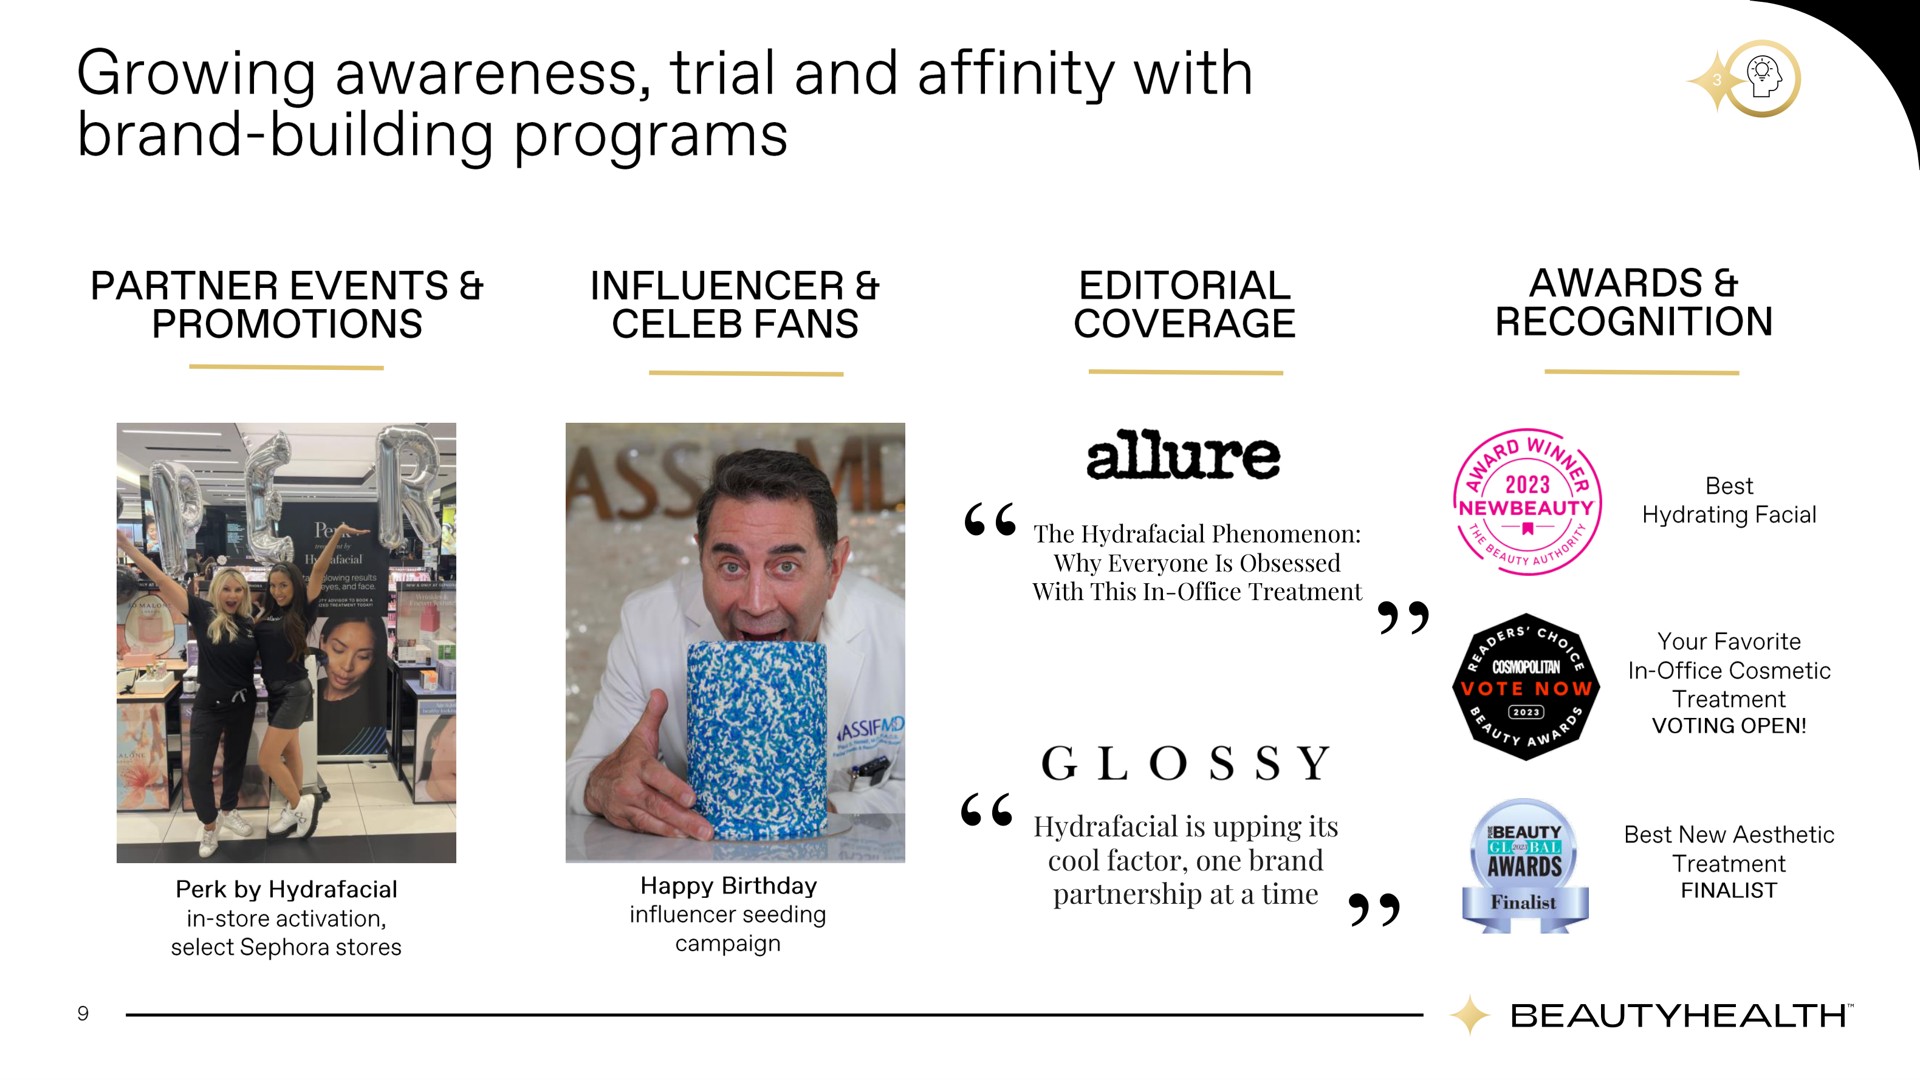 is upping its cool factor one brand partnership at a time growing awareness trial and affinity with brand building programs allure | Hydrafacial